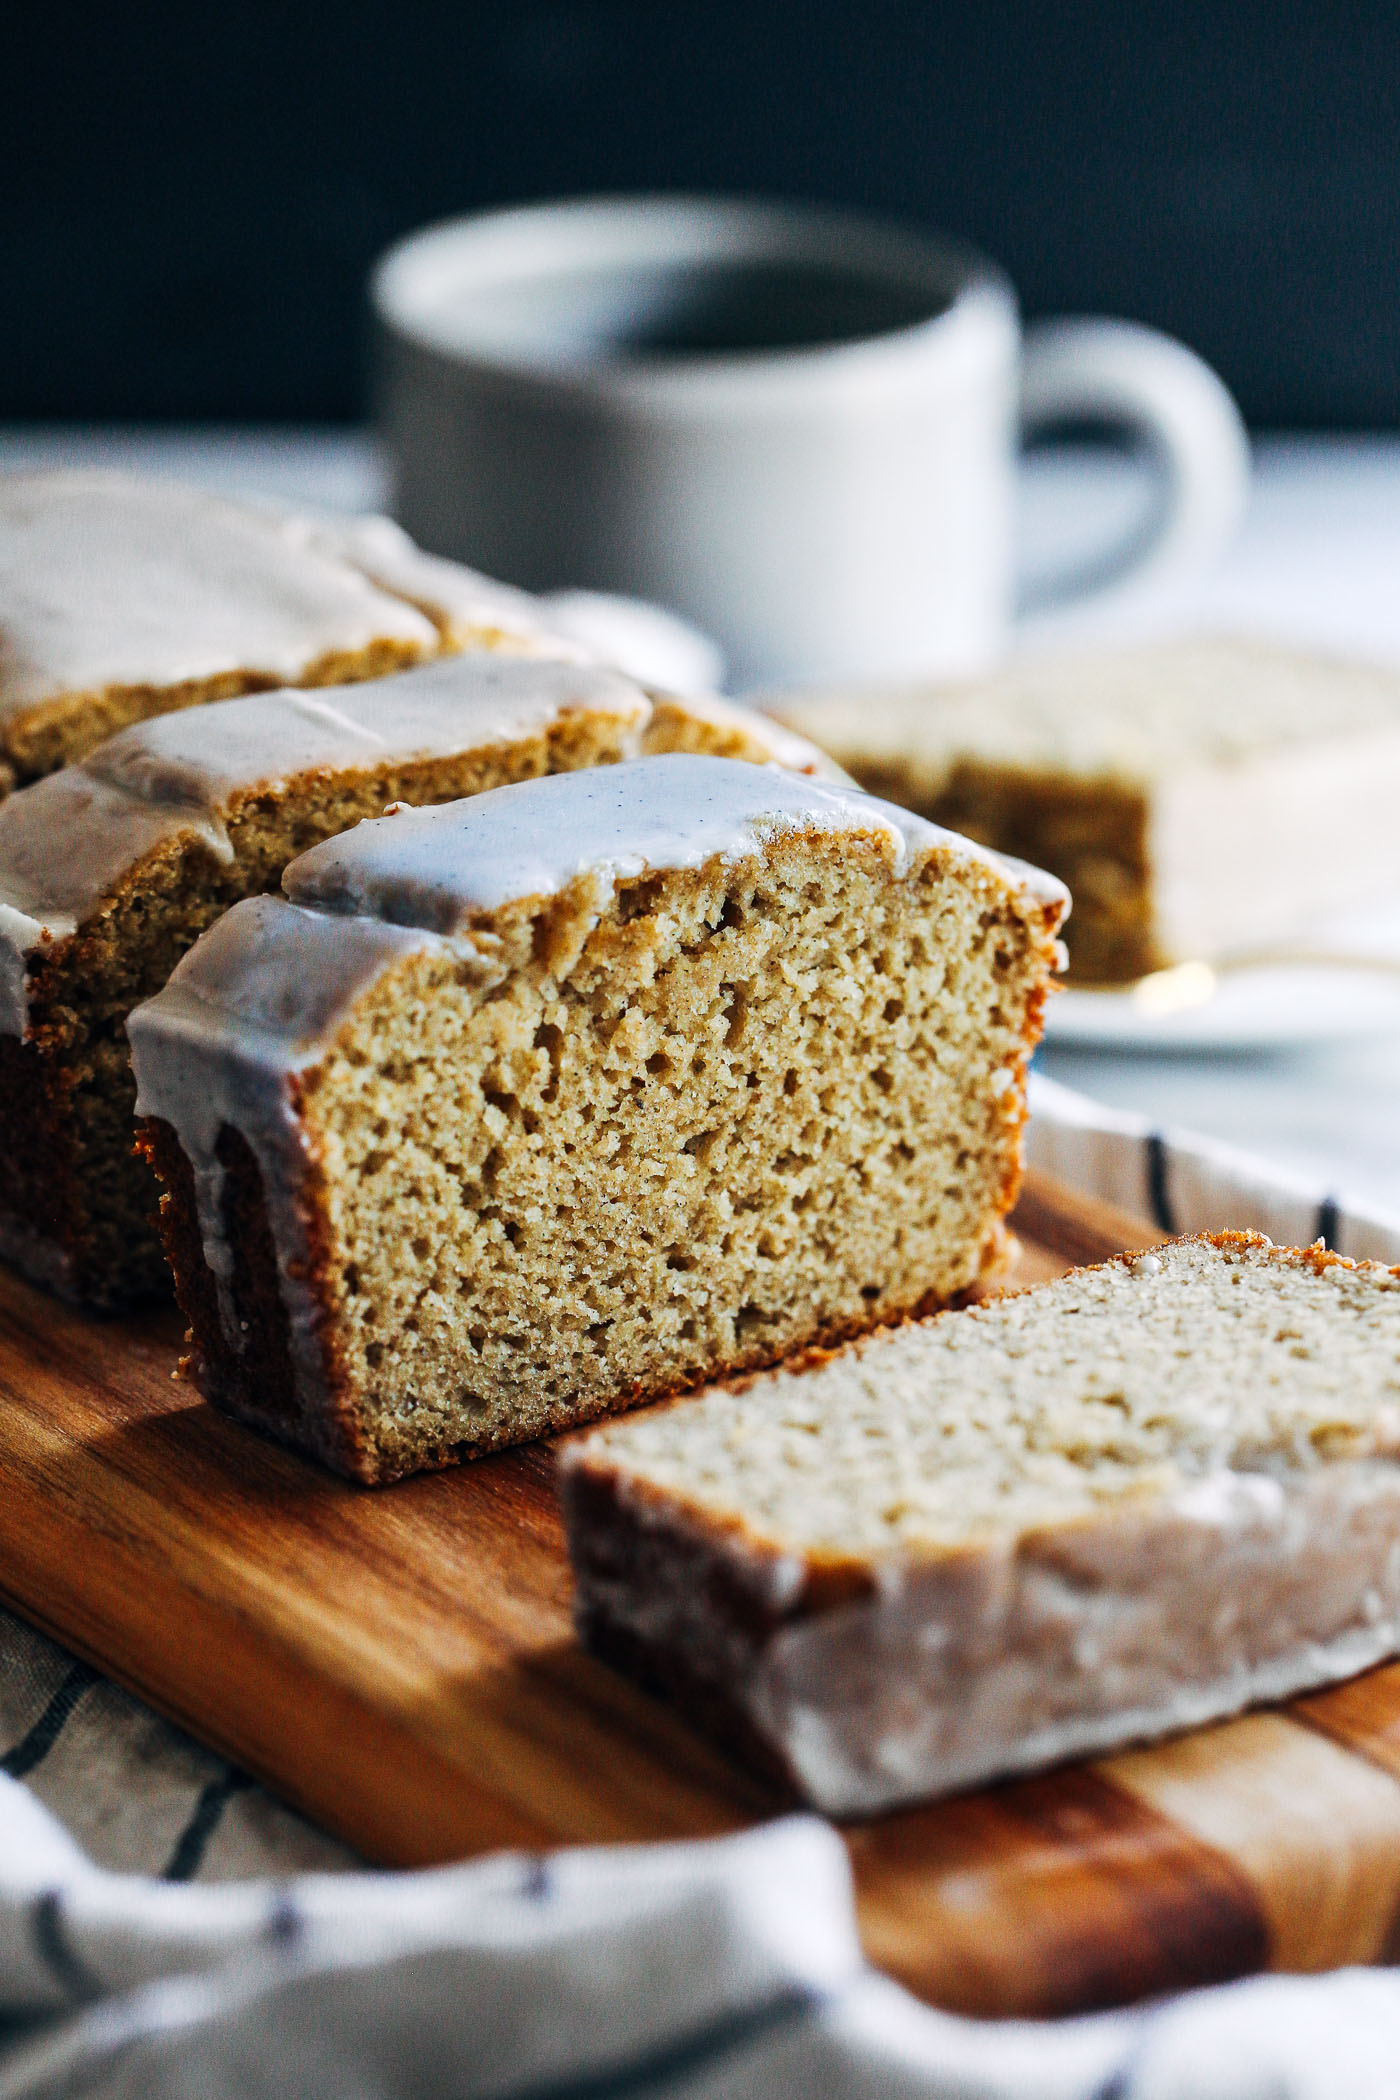 Gluten Free Carrot Cake With Almond Flour - Healthy Life Trainer